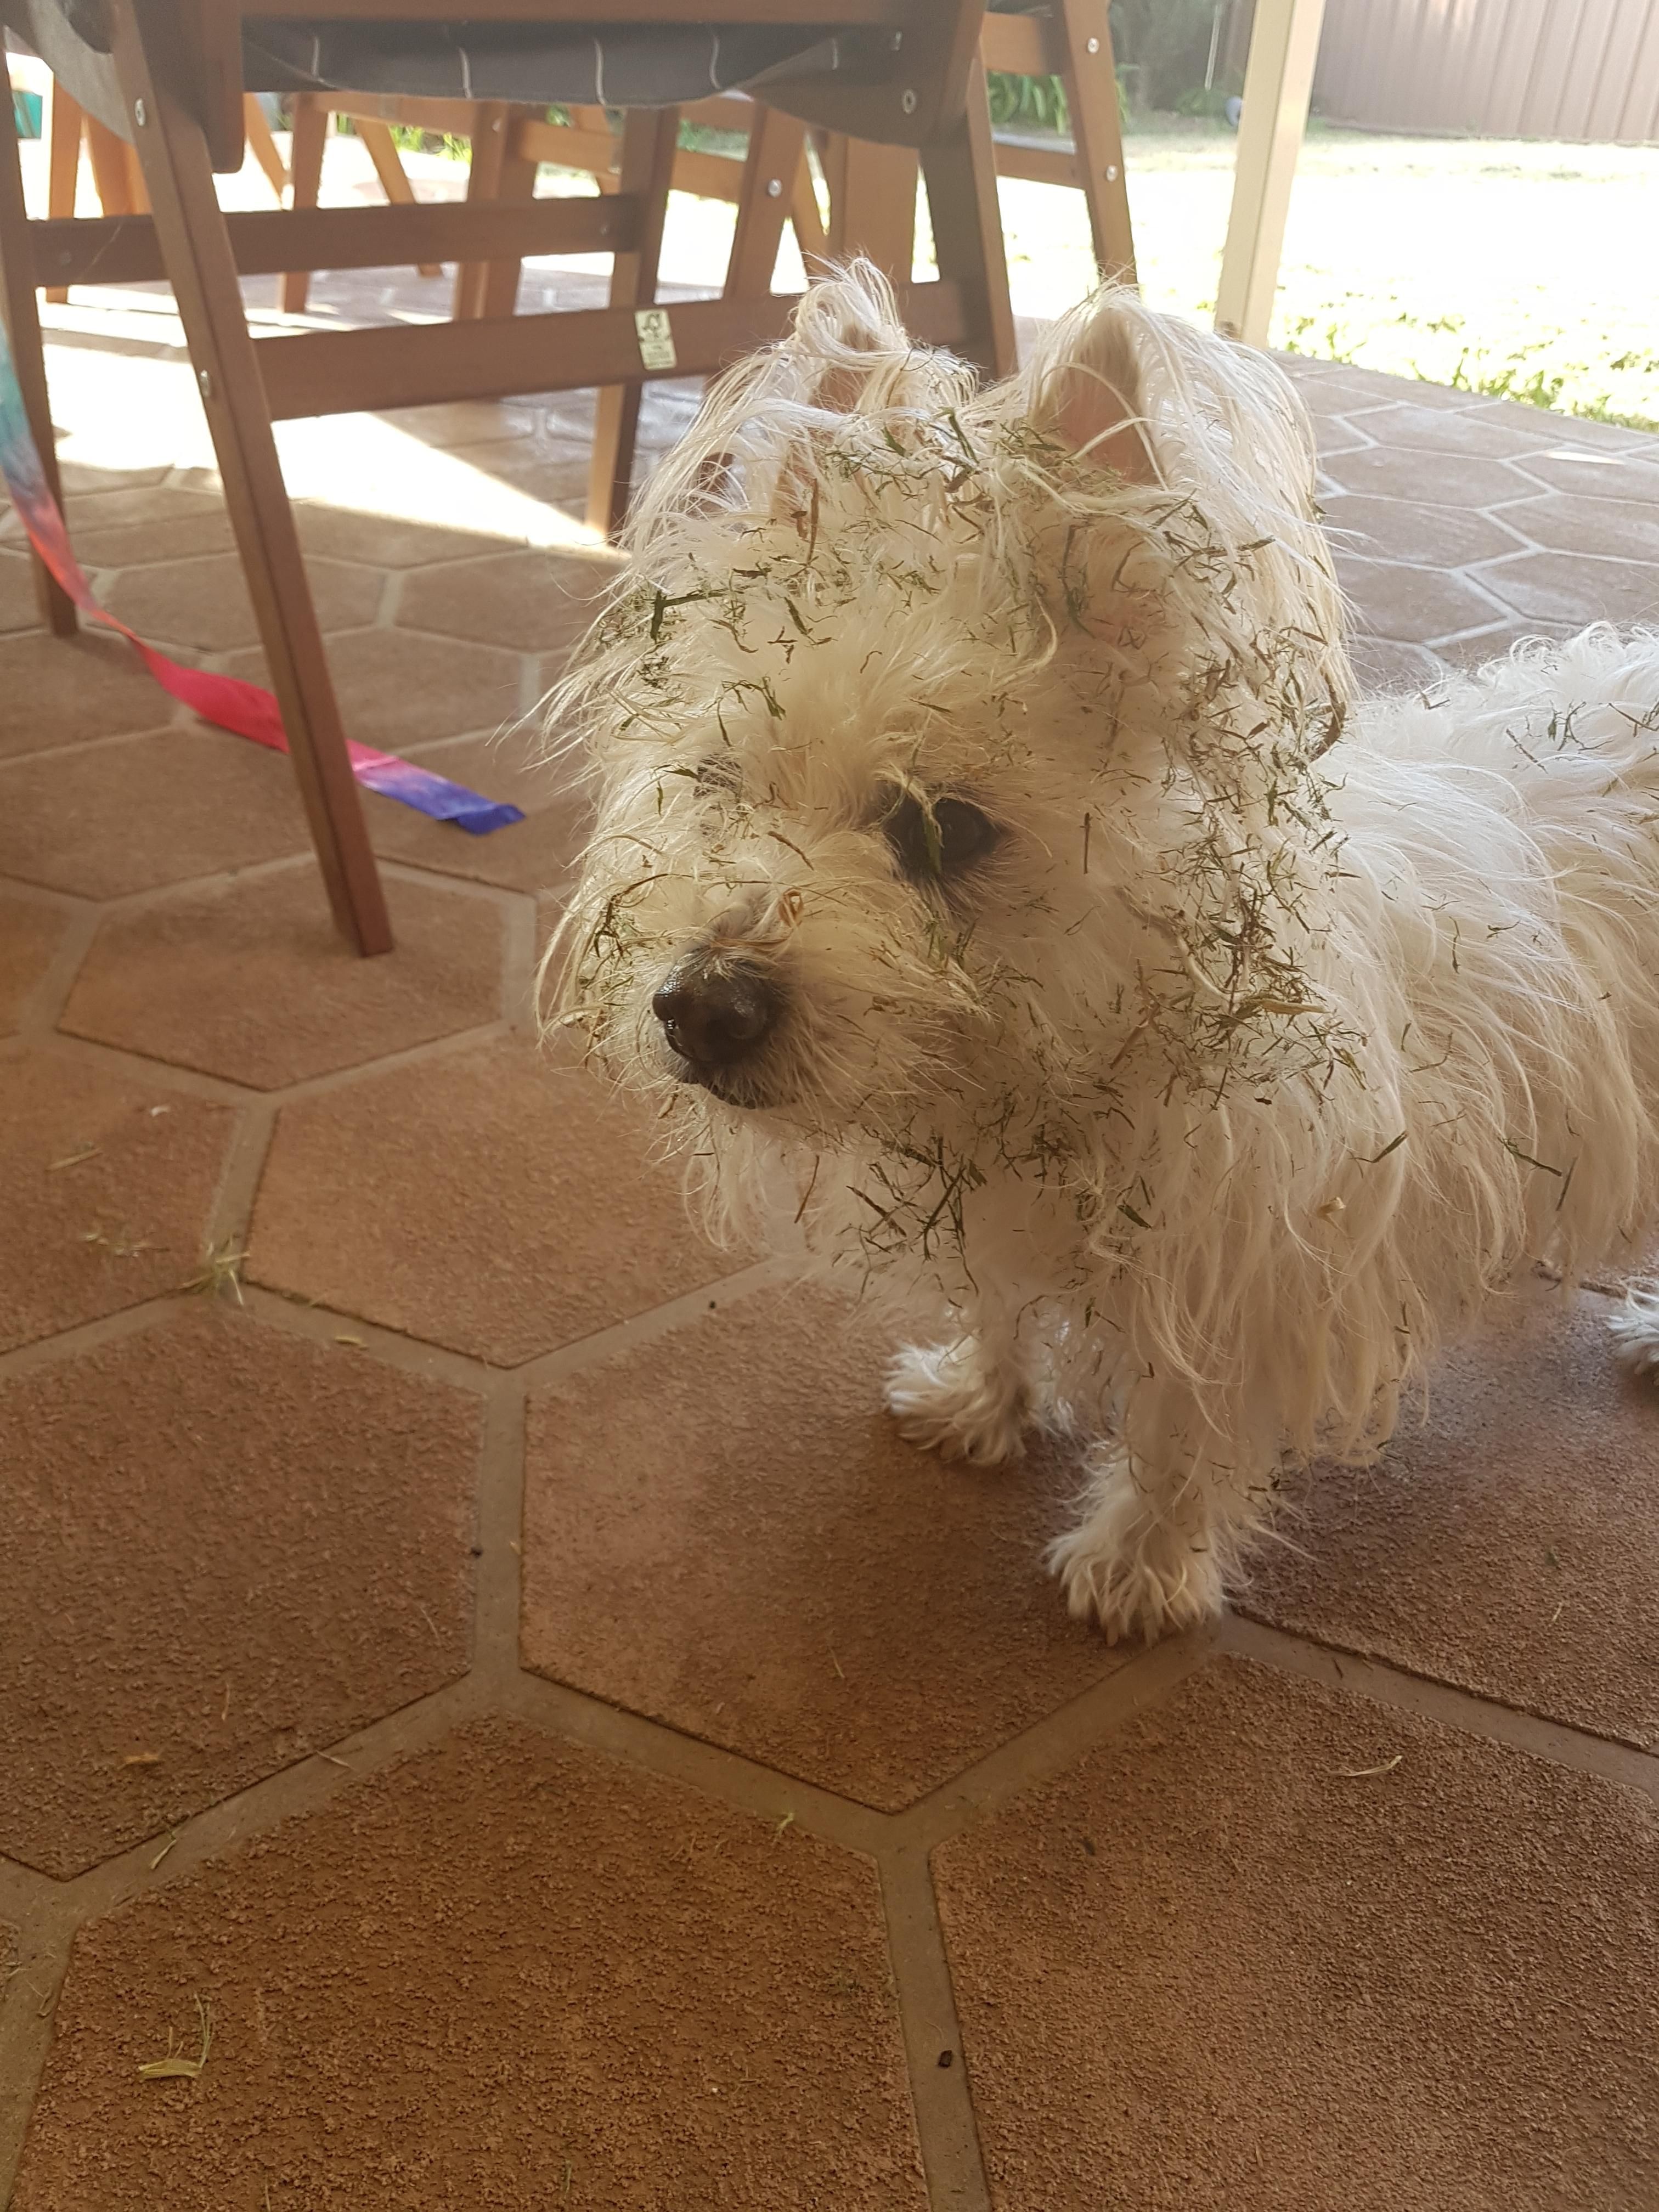 I think next time i'll bath the dog AFTER mowing the lawn...